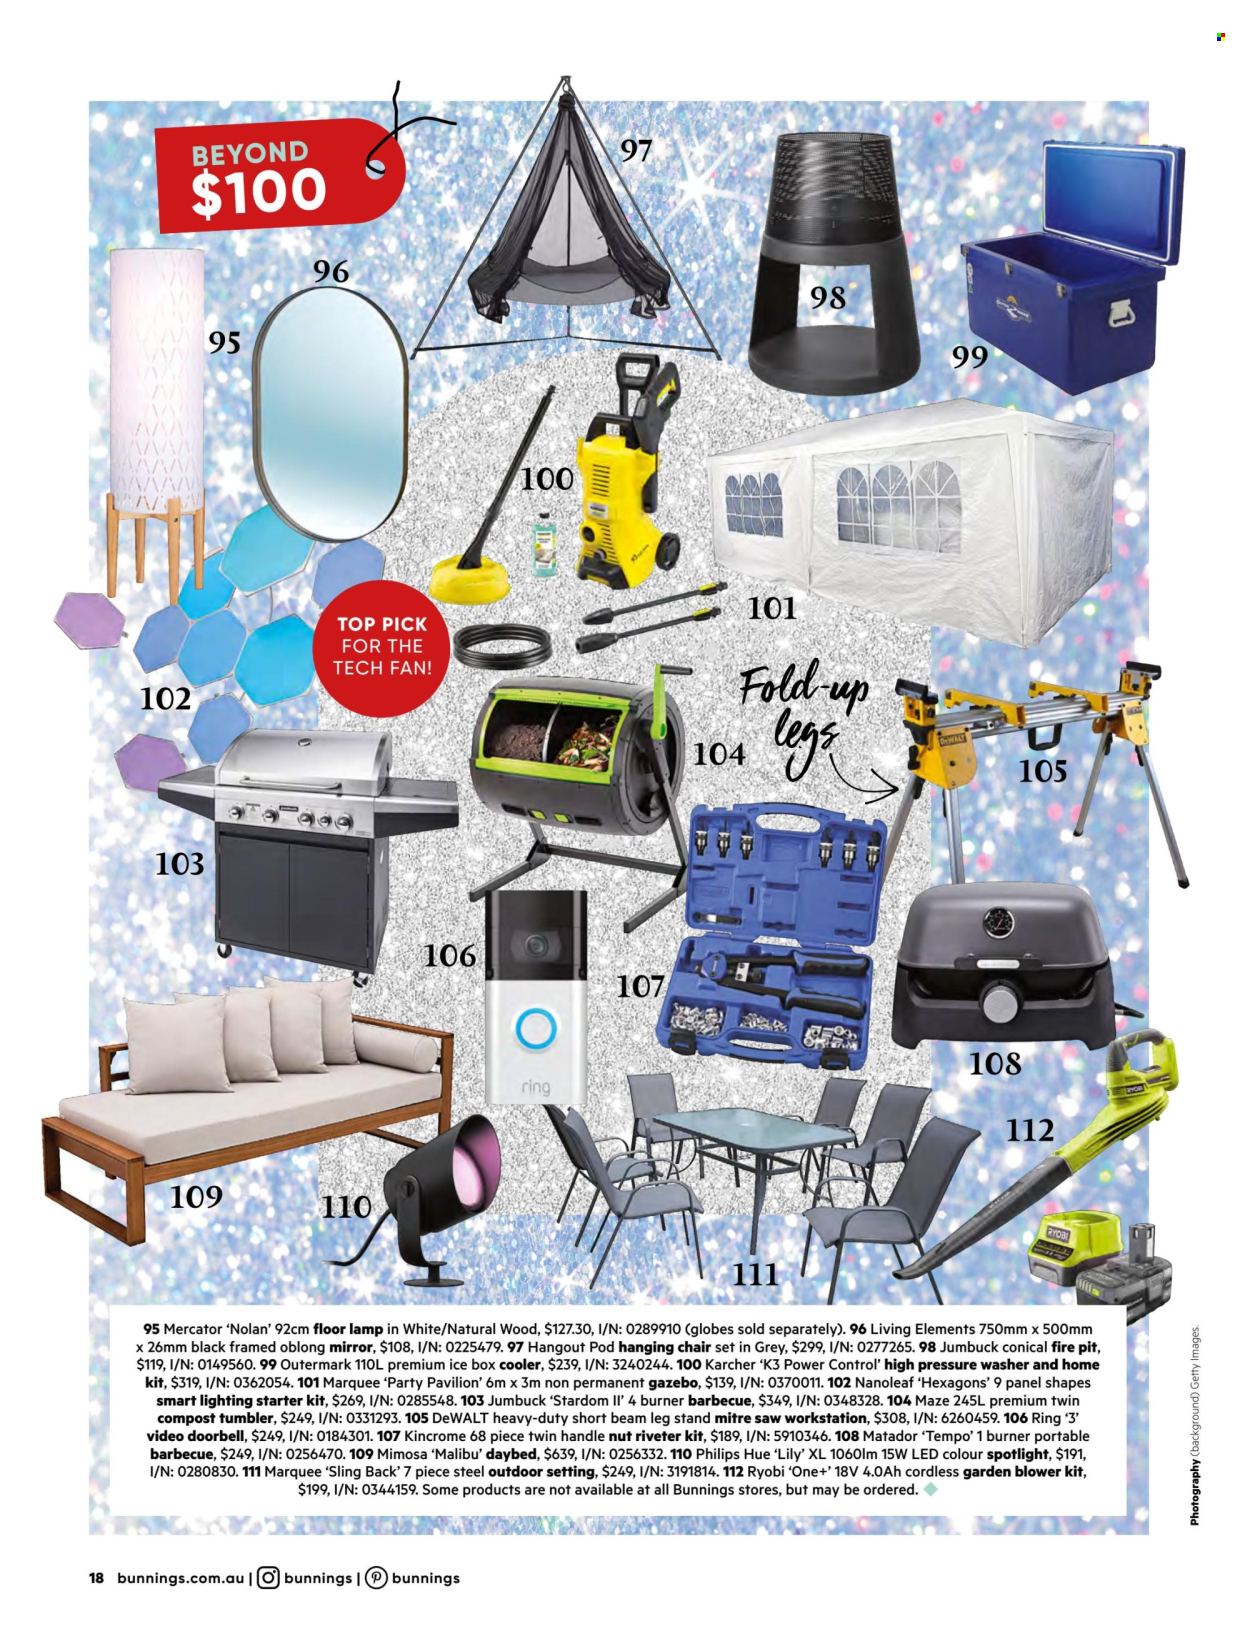 thumbnail - Bunnings Warehouse mailer - 01.11.2022 - 30.11.2022 - Sales products - chair, daybed, mirror, tumbler, ice box, spotlight, Philips, doorbell, video doorbell, lamp, floor lamp, lighting, DeWALT, Ryobi, saw, blower, pressure washer, Kärcher, gazebo, pavilion, fire bowl, portable barbecue, compost. Page 18.